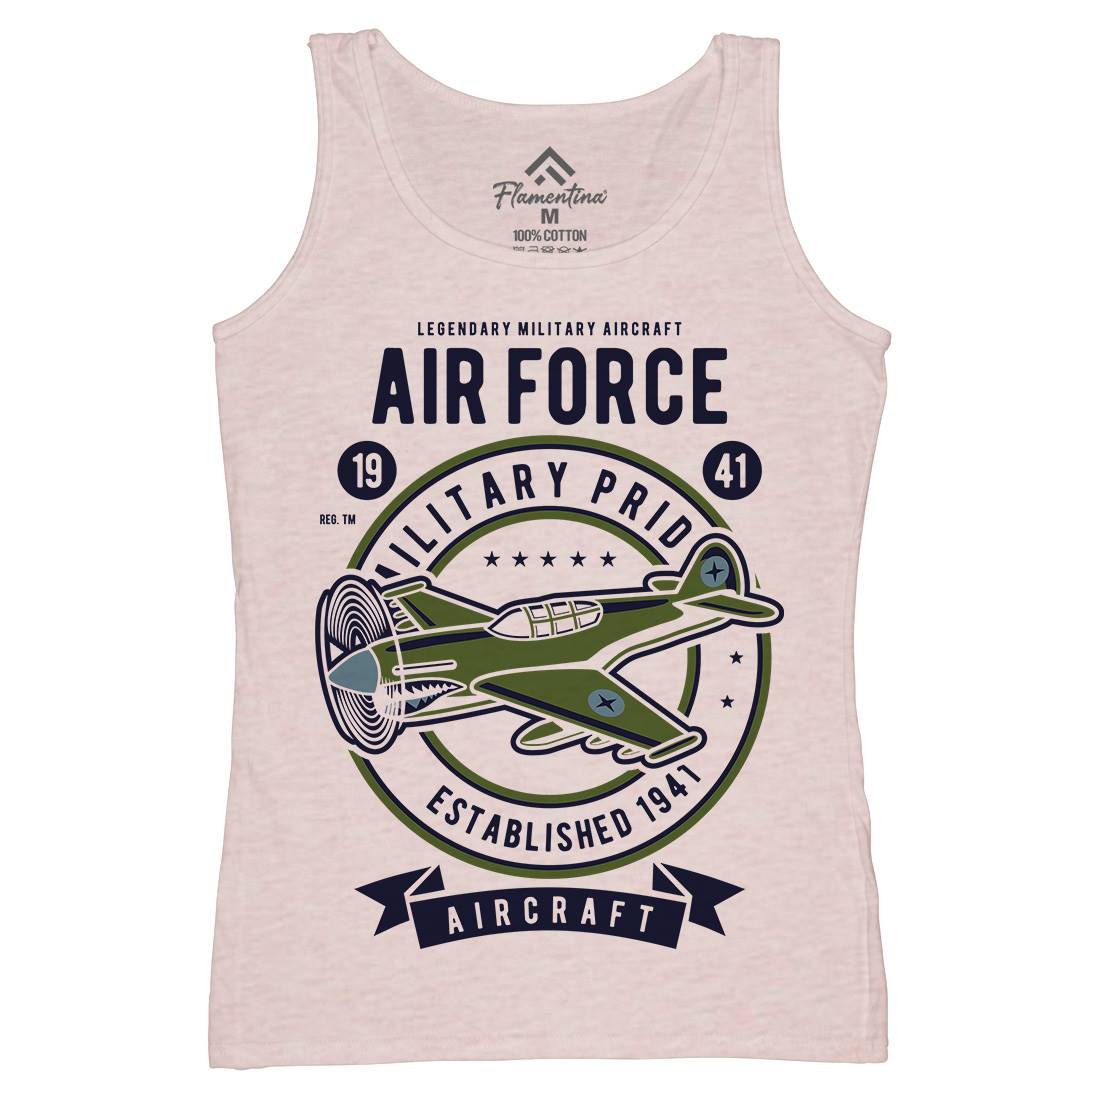 Air Force Womens Organic Tank Top Vest Army D502